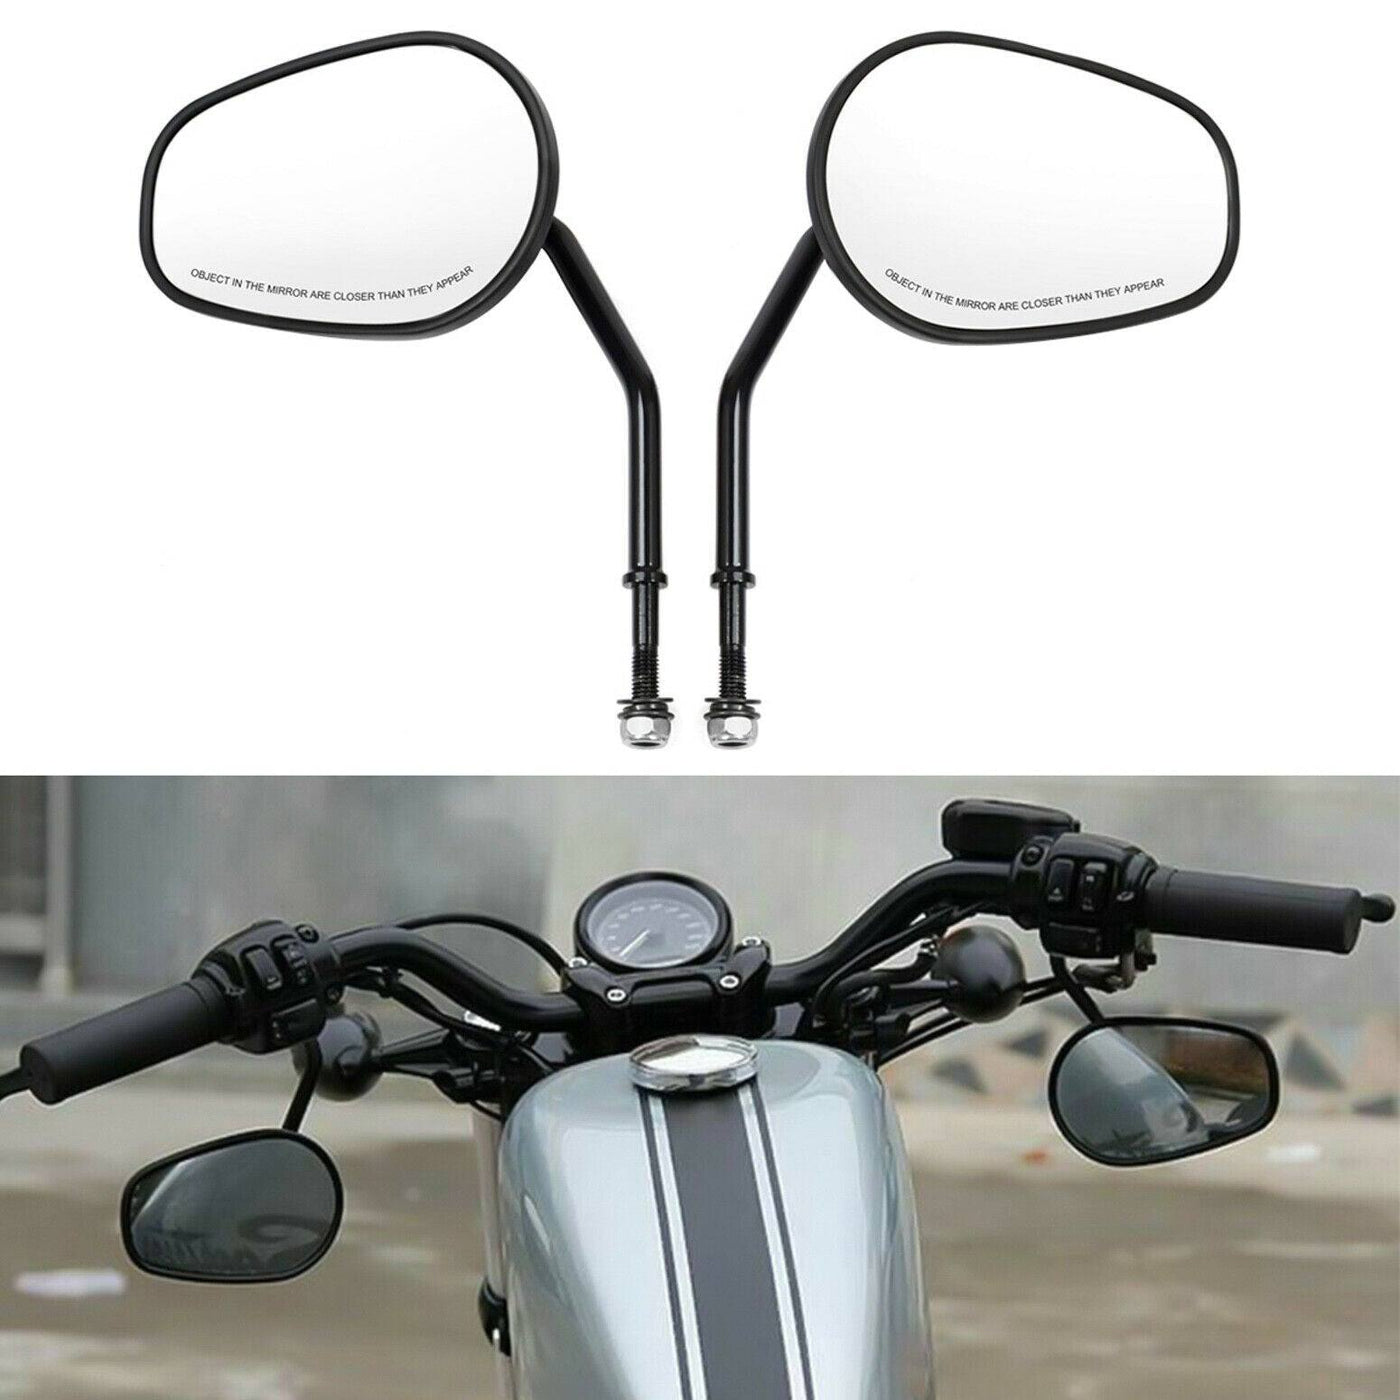 Short Stem Rear View Mirror Fit for Harley Street Glide Road Glide Sportster 883 - Moto Life Products